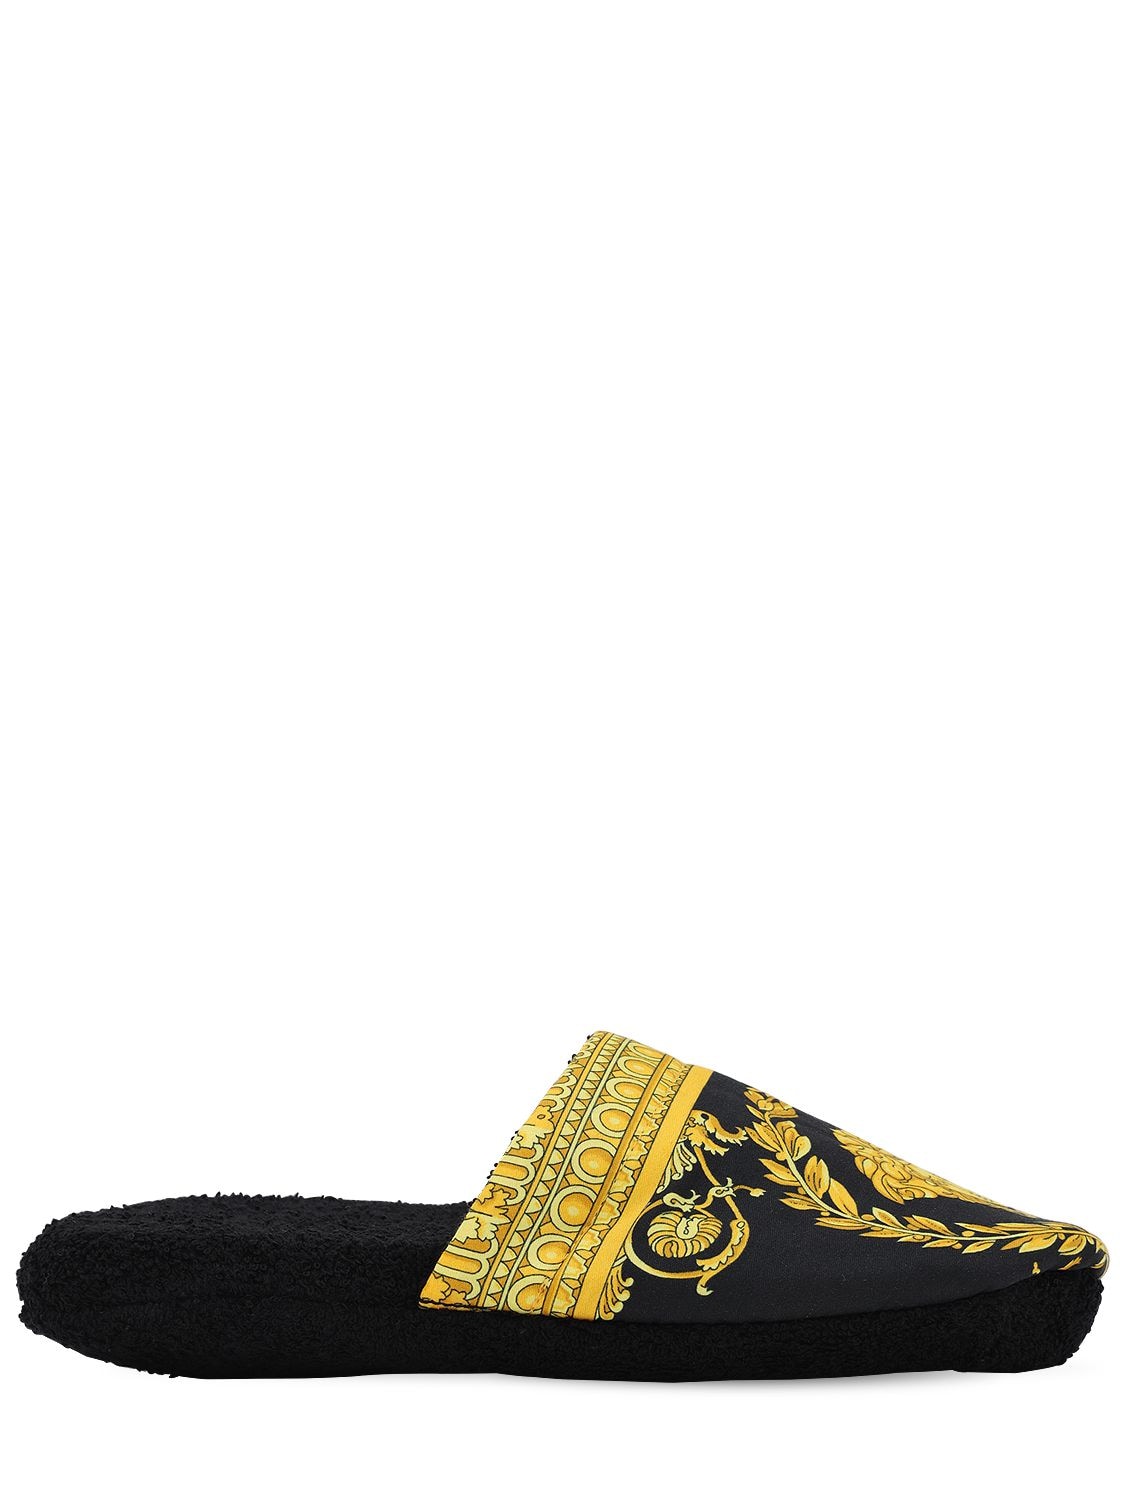 Versace Barocco & Robe Cotton Slippers In Black,gold